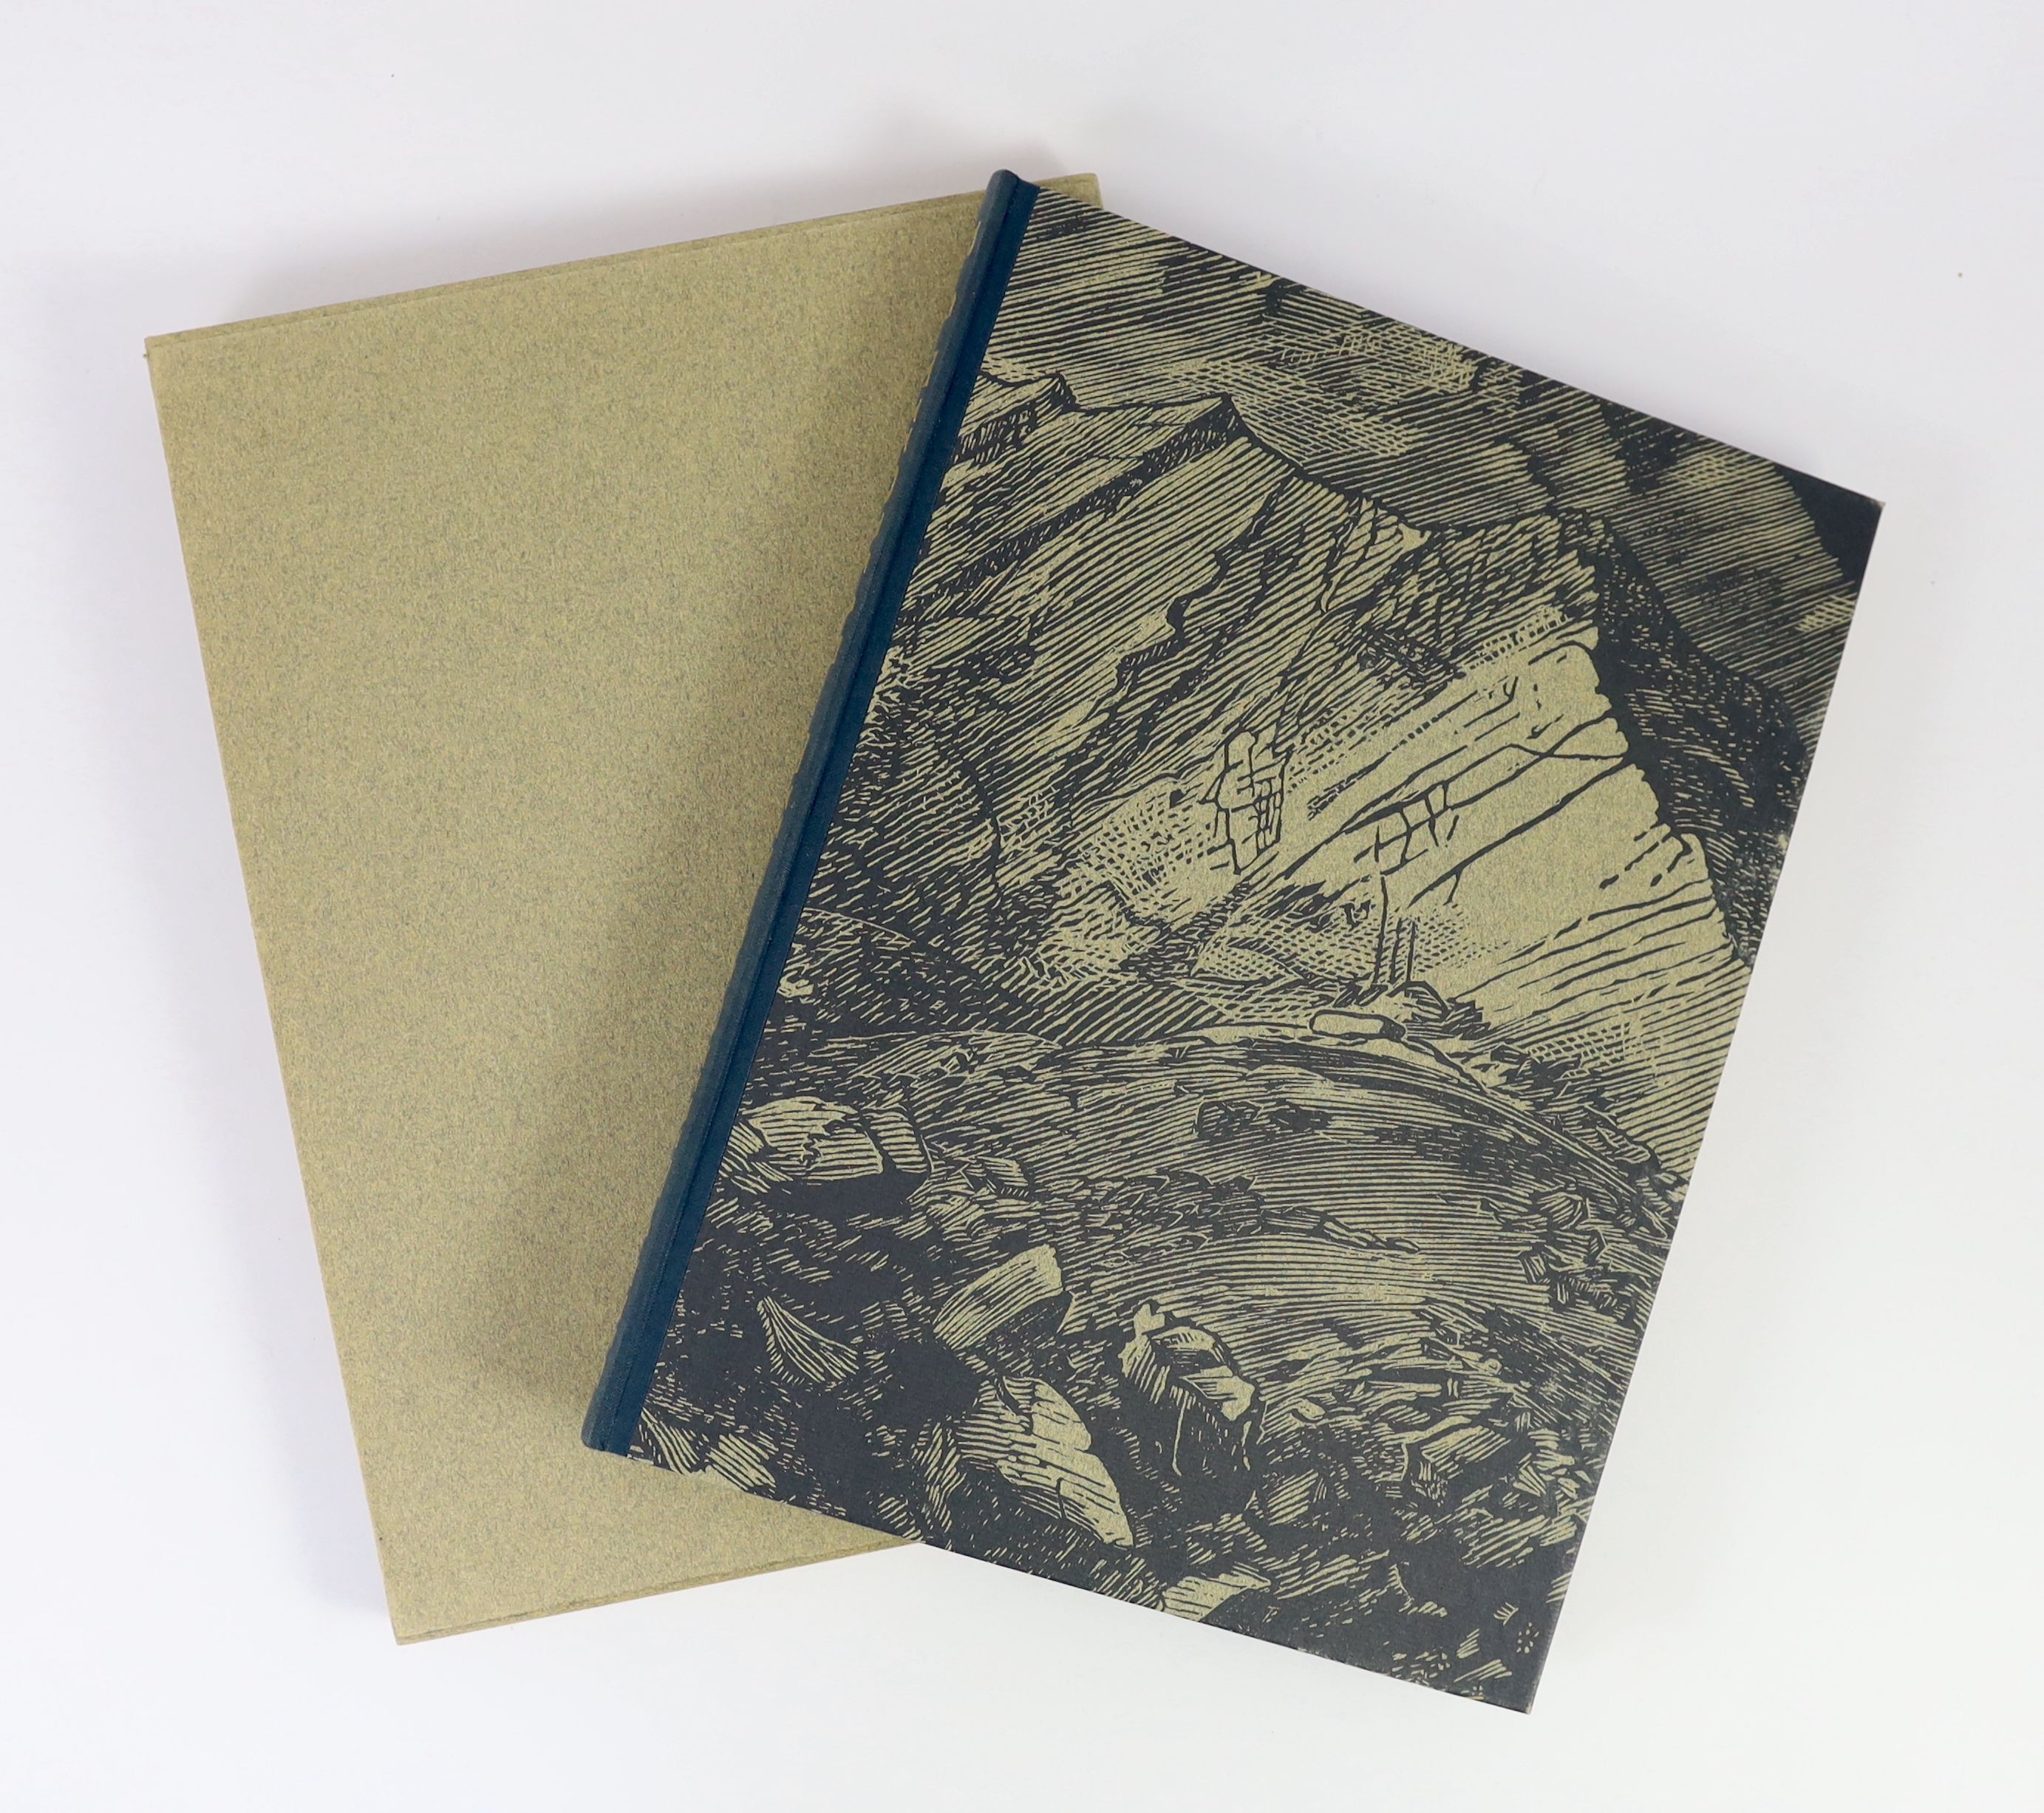 Thomas, Ronald Stuart - The Mountains, one of 350, illustrated by John Piper, with 10 plates, 4to, original half cloth, Chilmark Press, New York, 1968, in slip case.